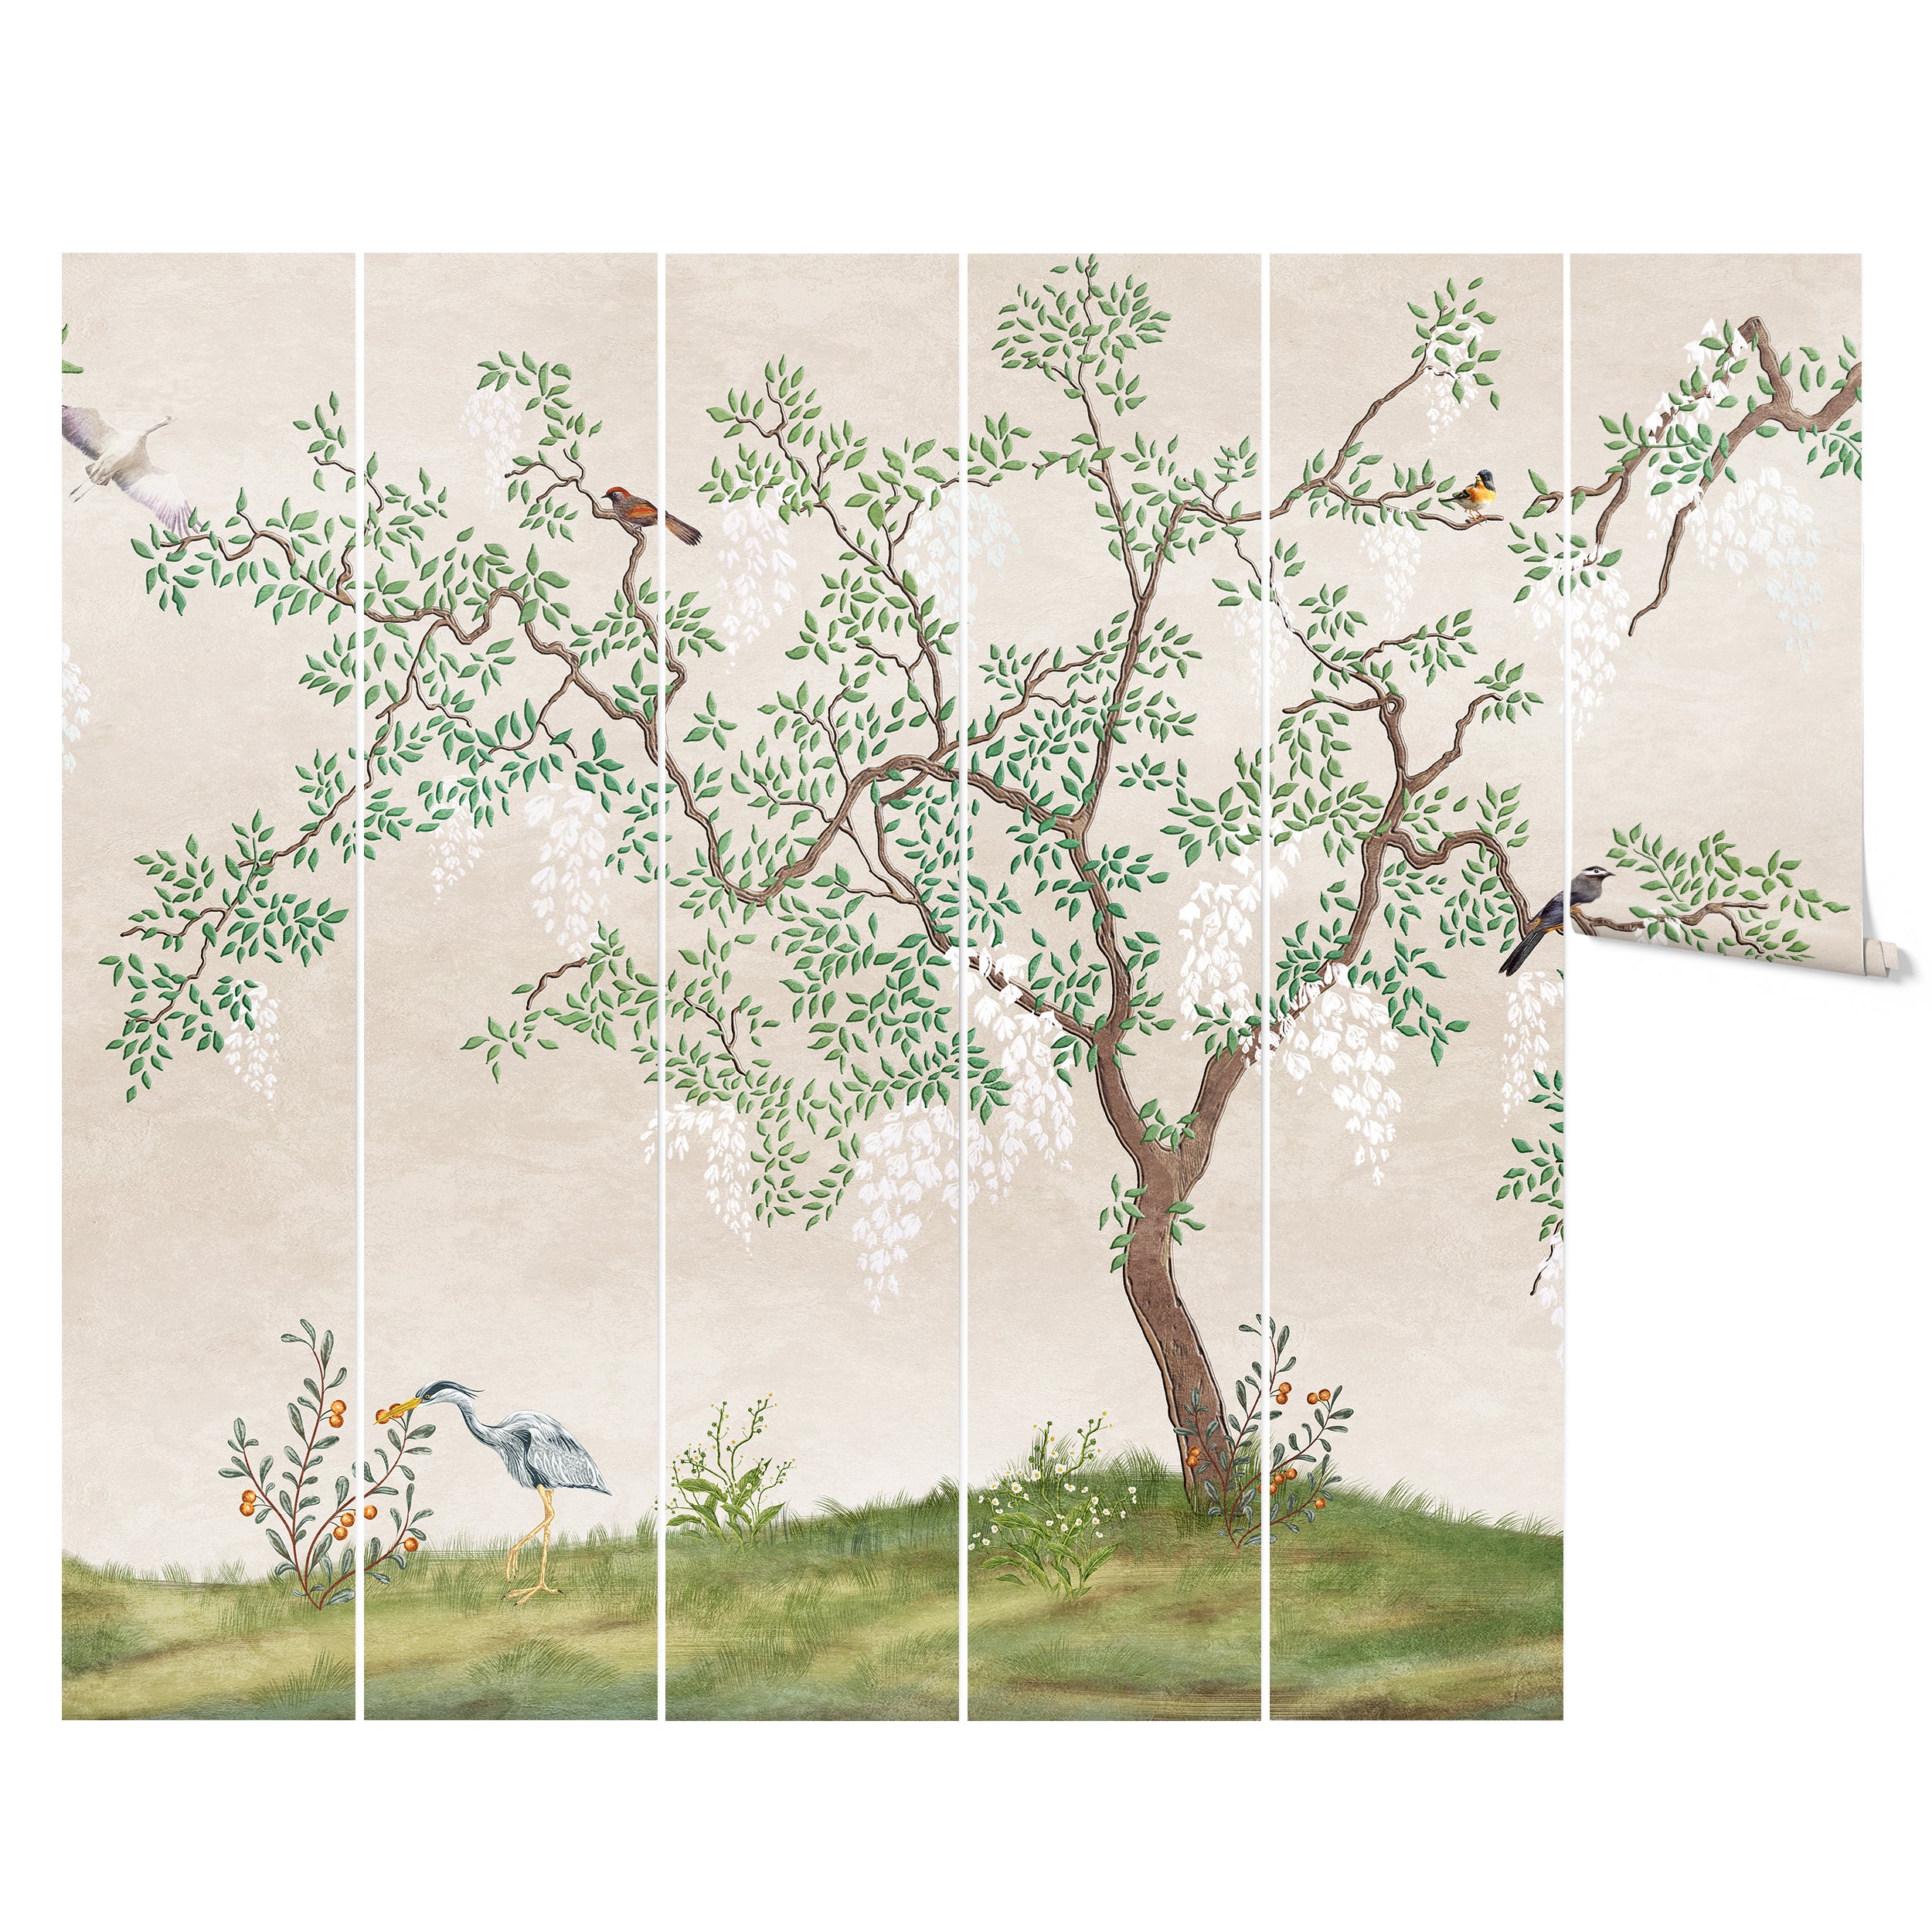 A section of the Chinoiserie - Wallpaper Mural, focusing on the intricate design of a large tree with birds perched among the branches and a heron at the base. The detailed artwork and soft pastel background make it an ideal choice for adding elegance and an artistic touch to any room.